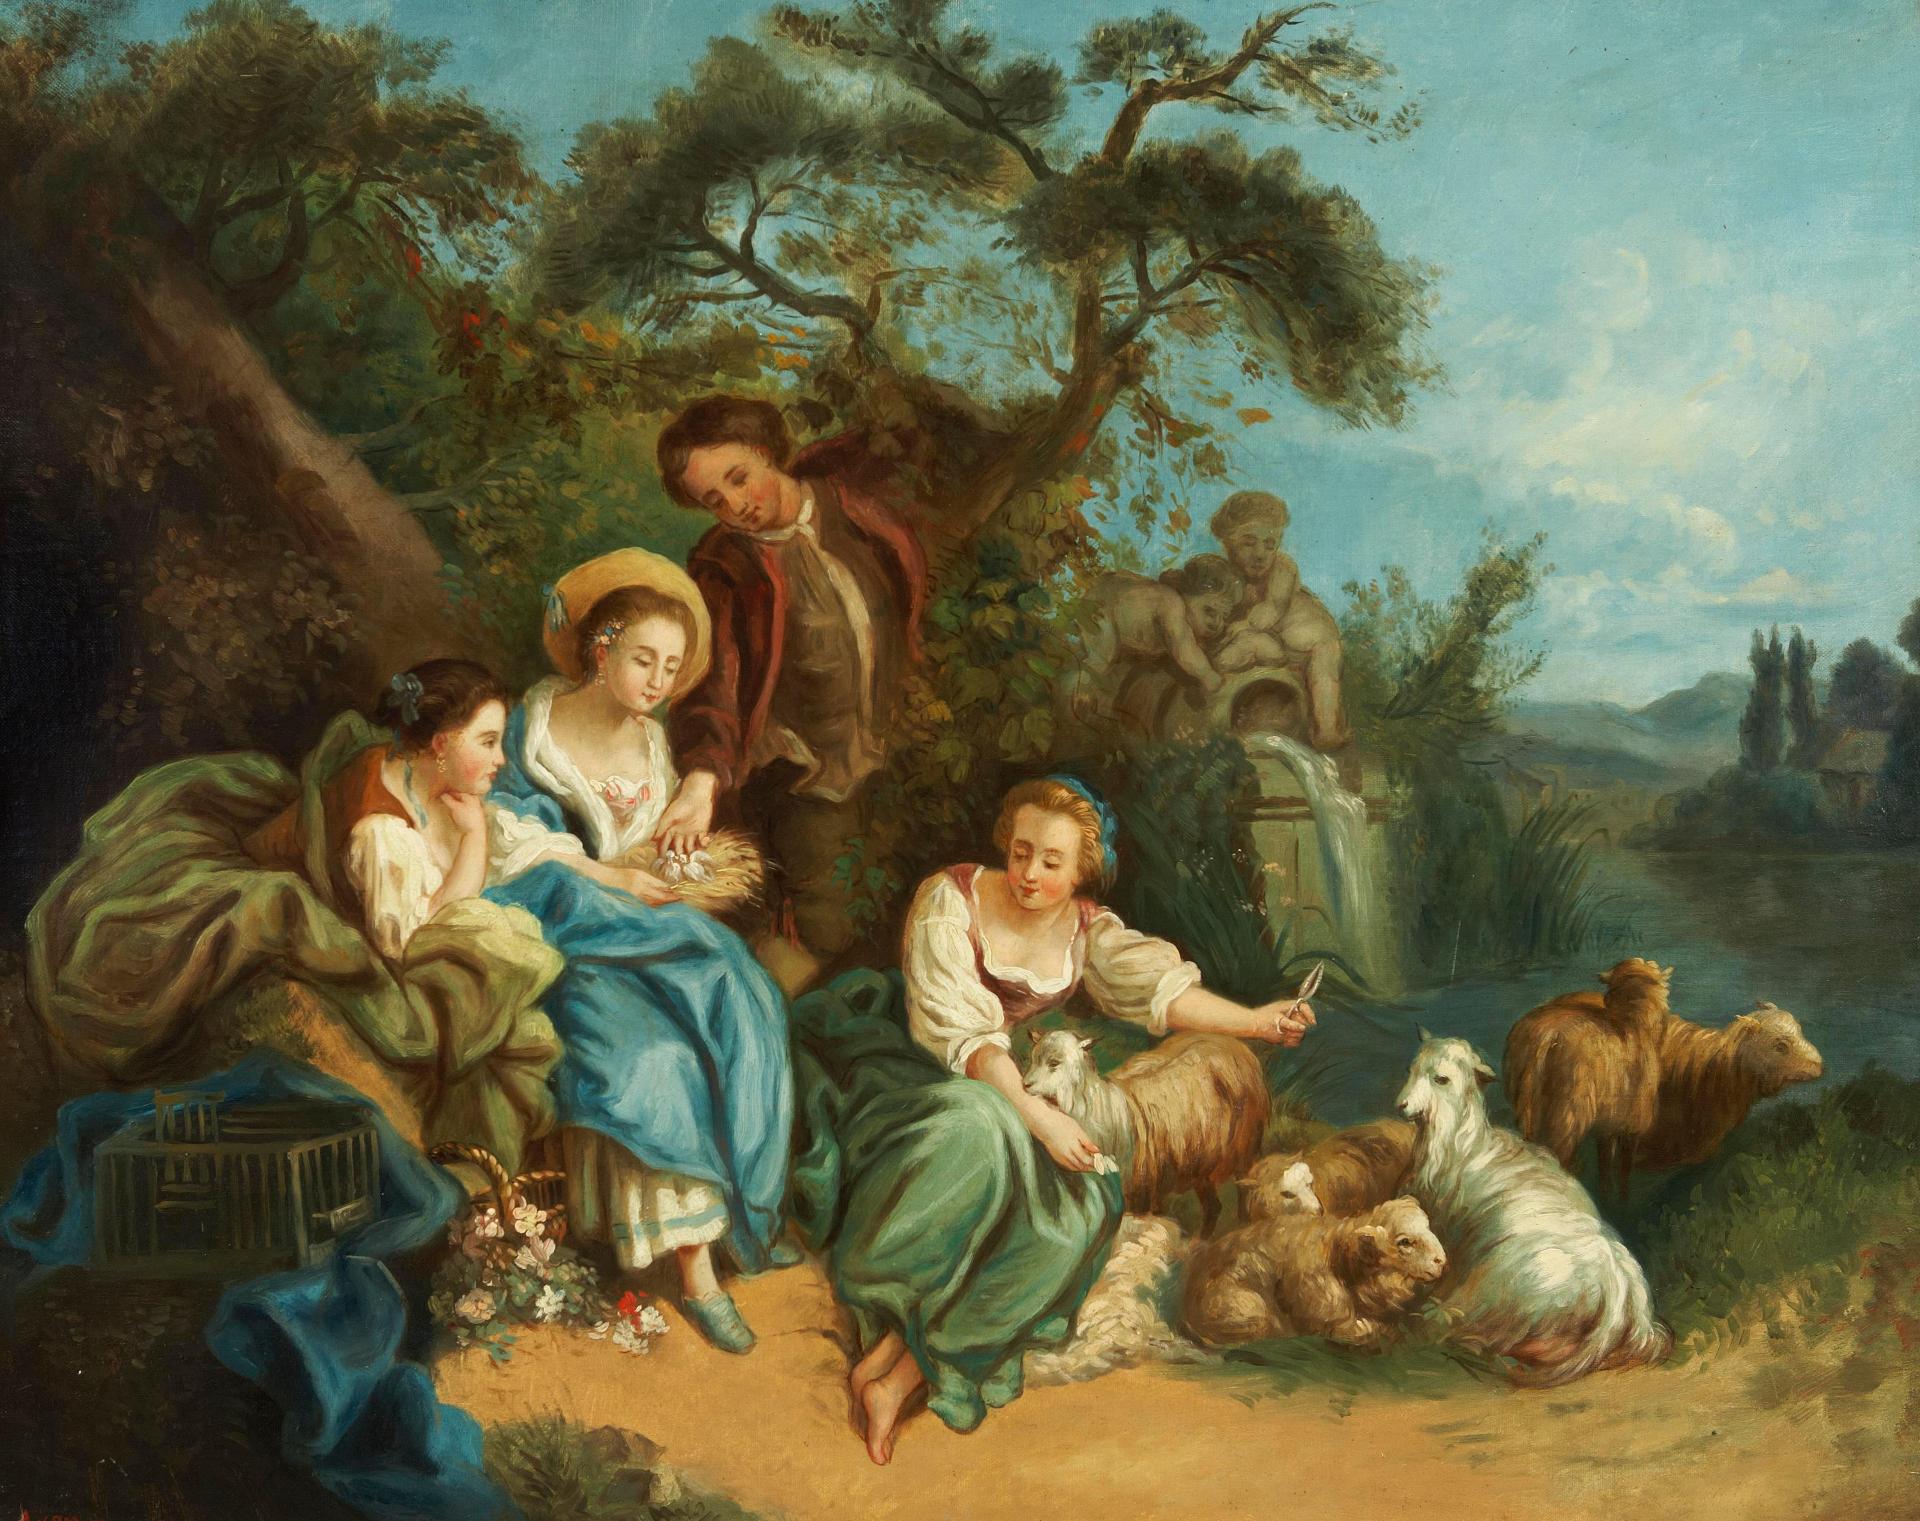 Francois Boucher (1703-1770) - Shepherdesses and sheep by a fountain